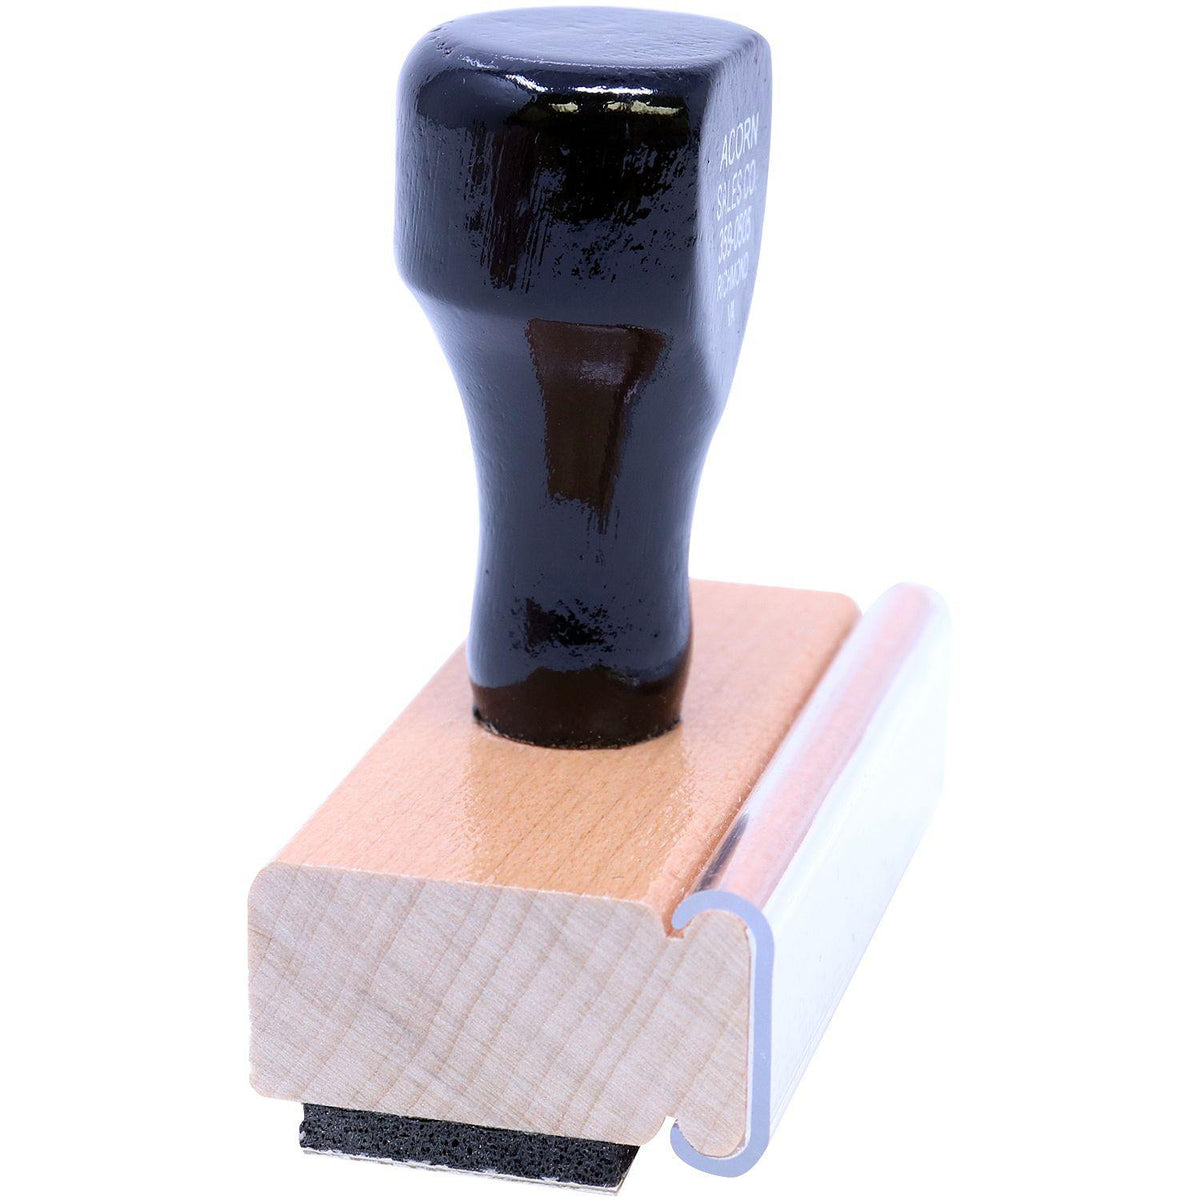 Side View of Large Nice Work Rubber Stamp at an Angle